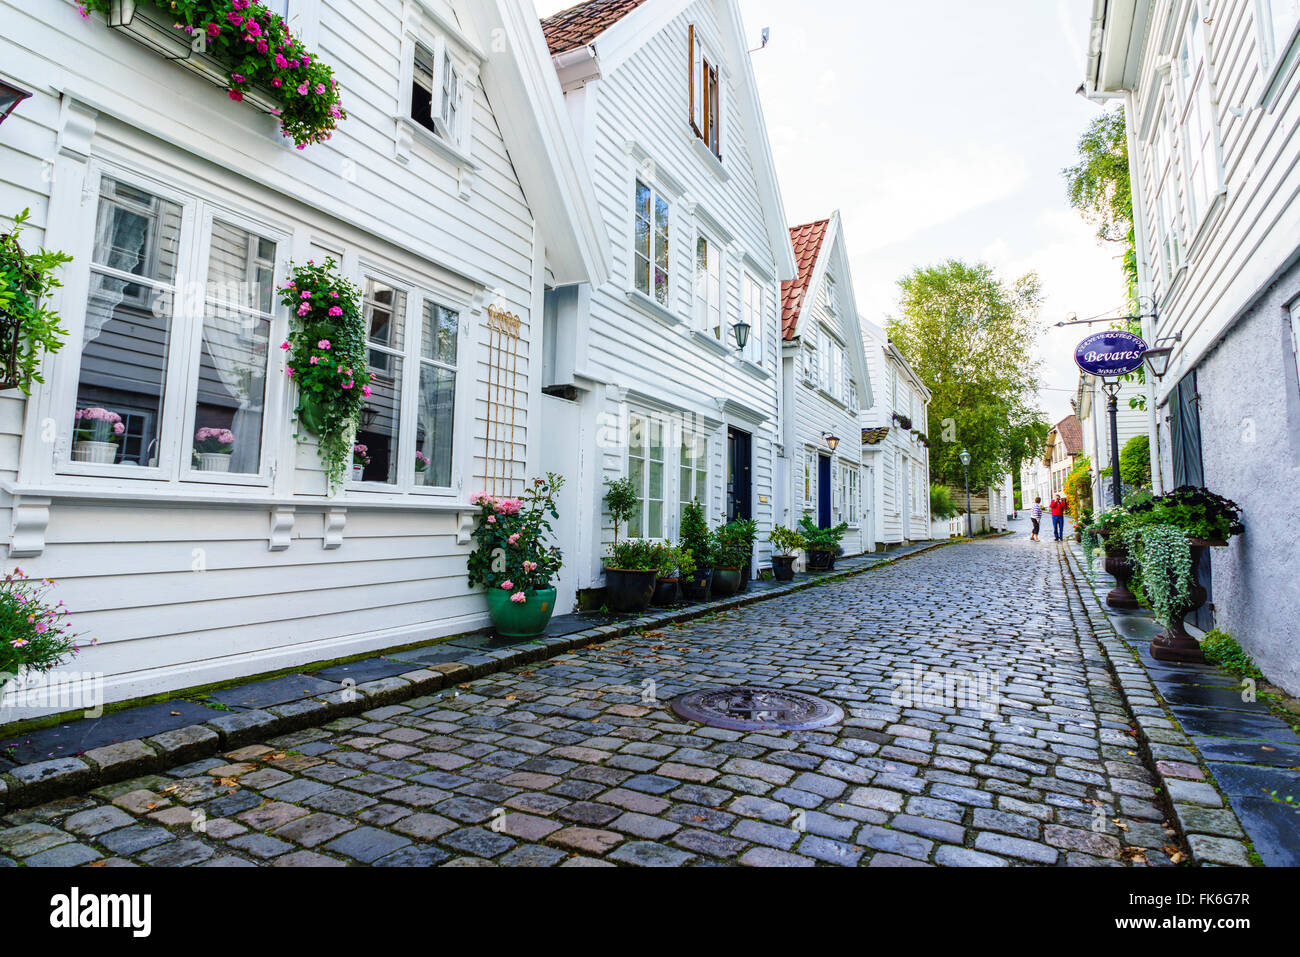 Old Stavanger, comprising about 250 buildings dating from early 18th century, Stavanger, Rotaland, Norway Stock Photo